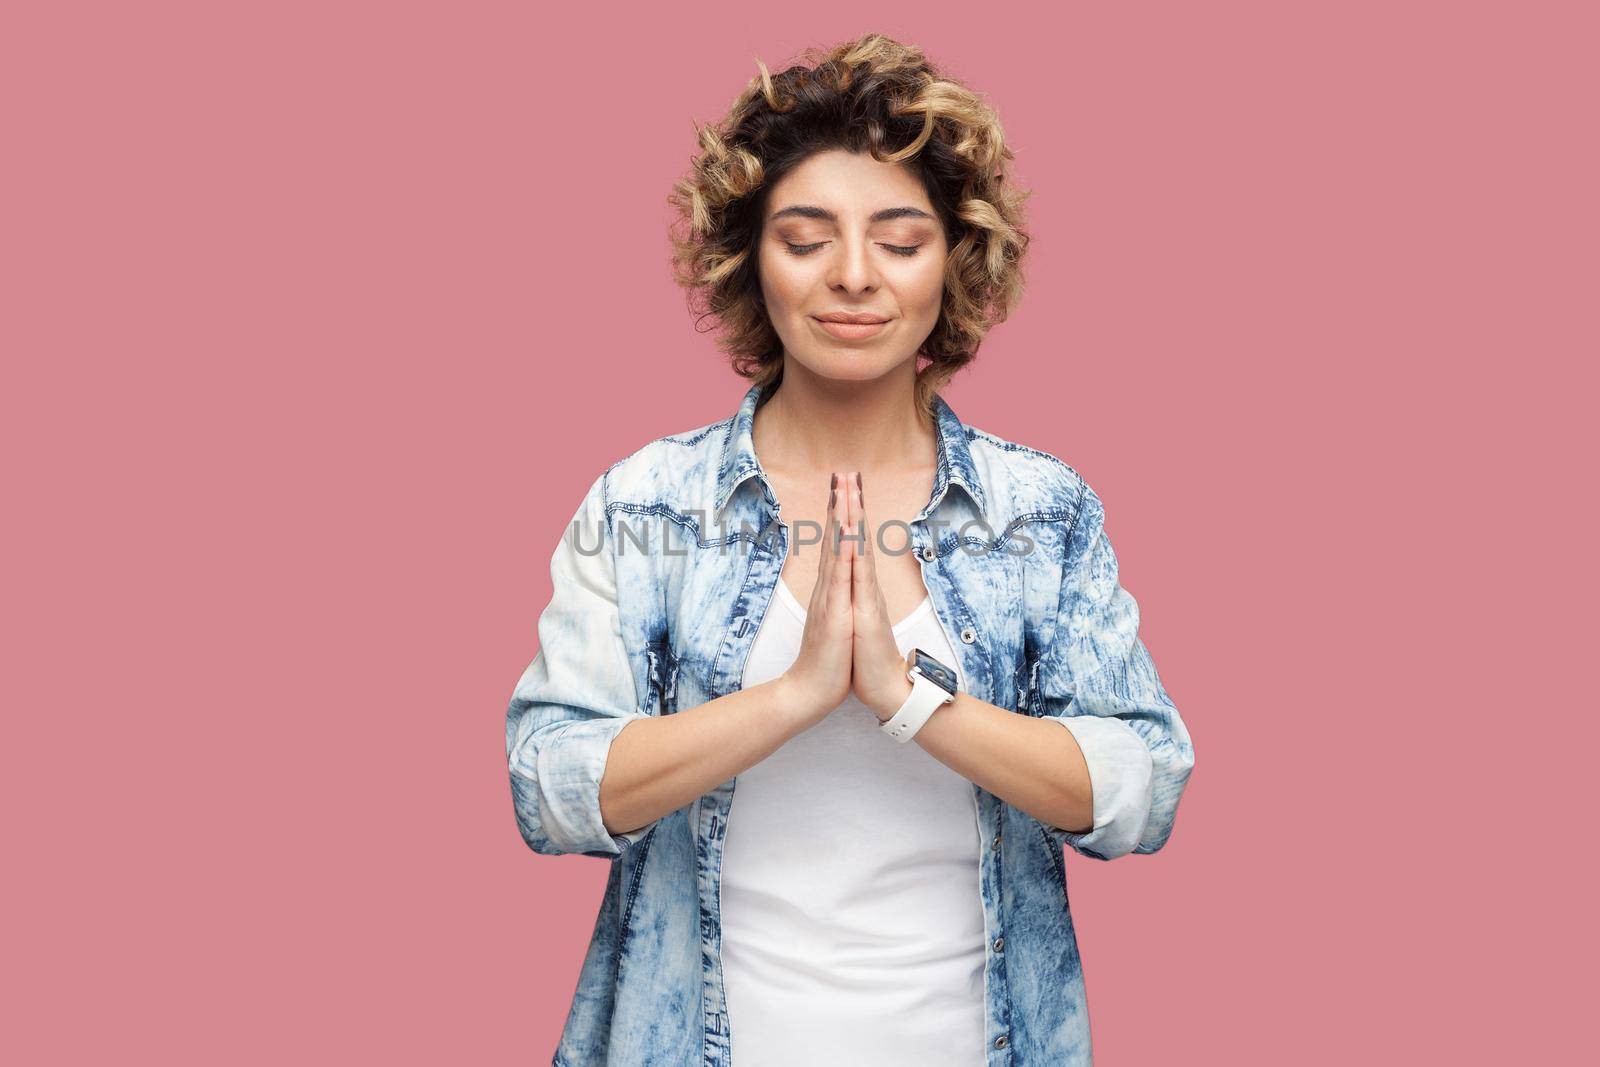 Portrait of calm young woman with curly hairstyle in casual blue shirt standing with closed eyes, palm hands, smile and doing yoga meditating. indoor studio shot, isolated on pink background.